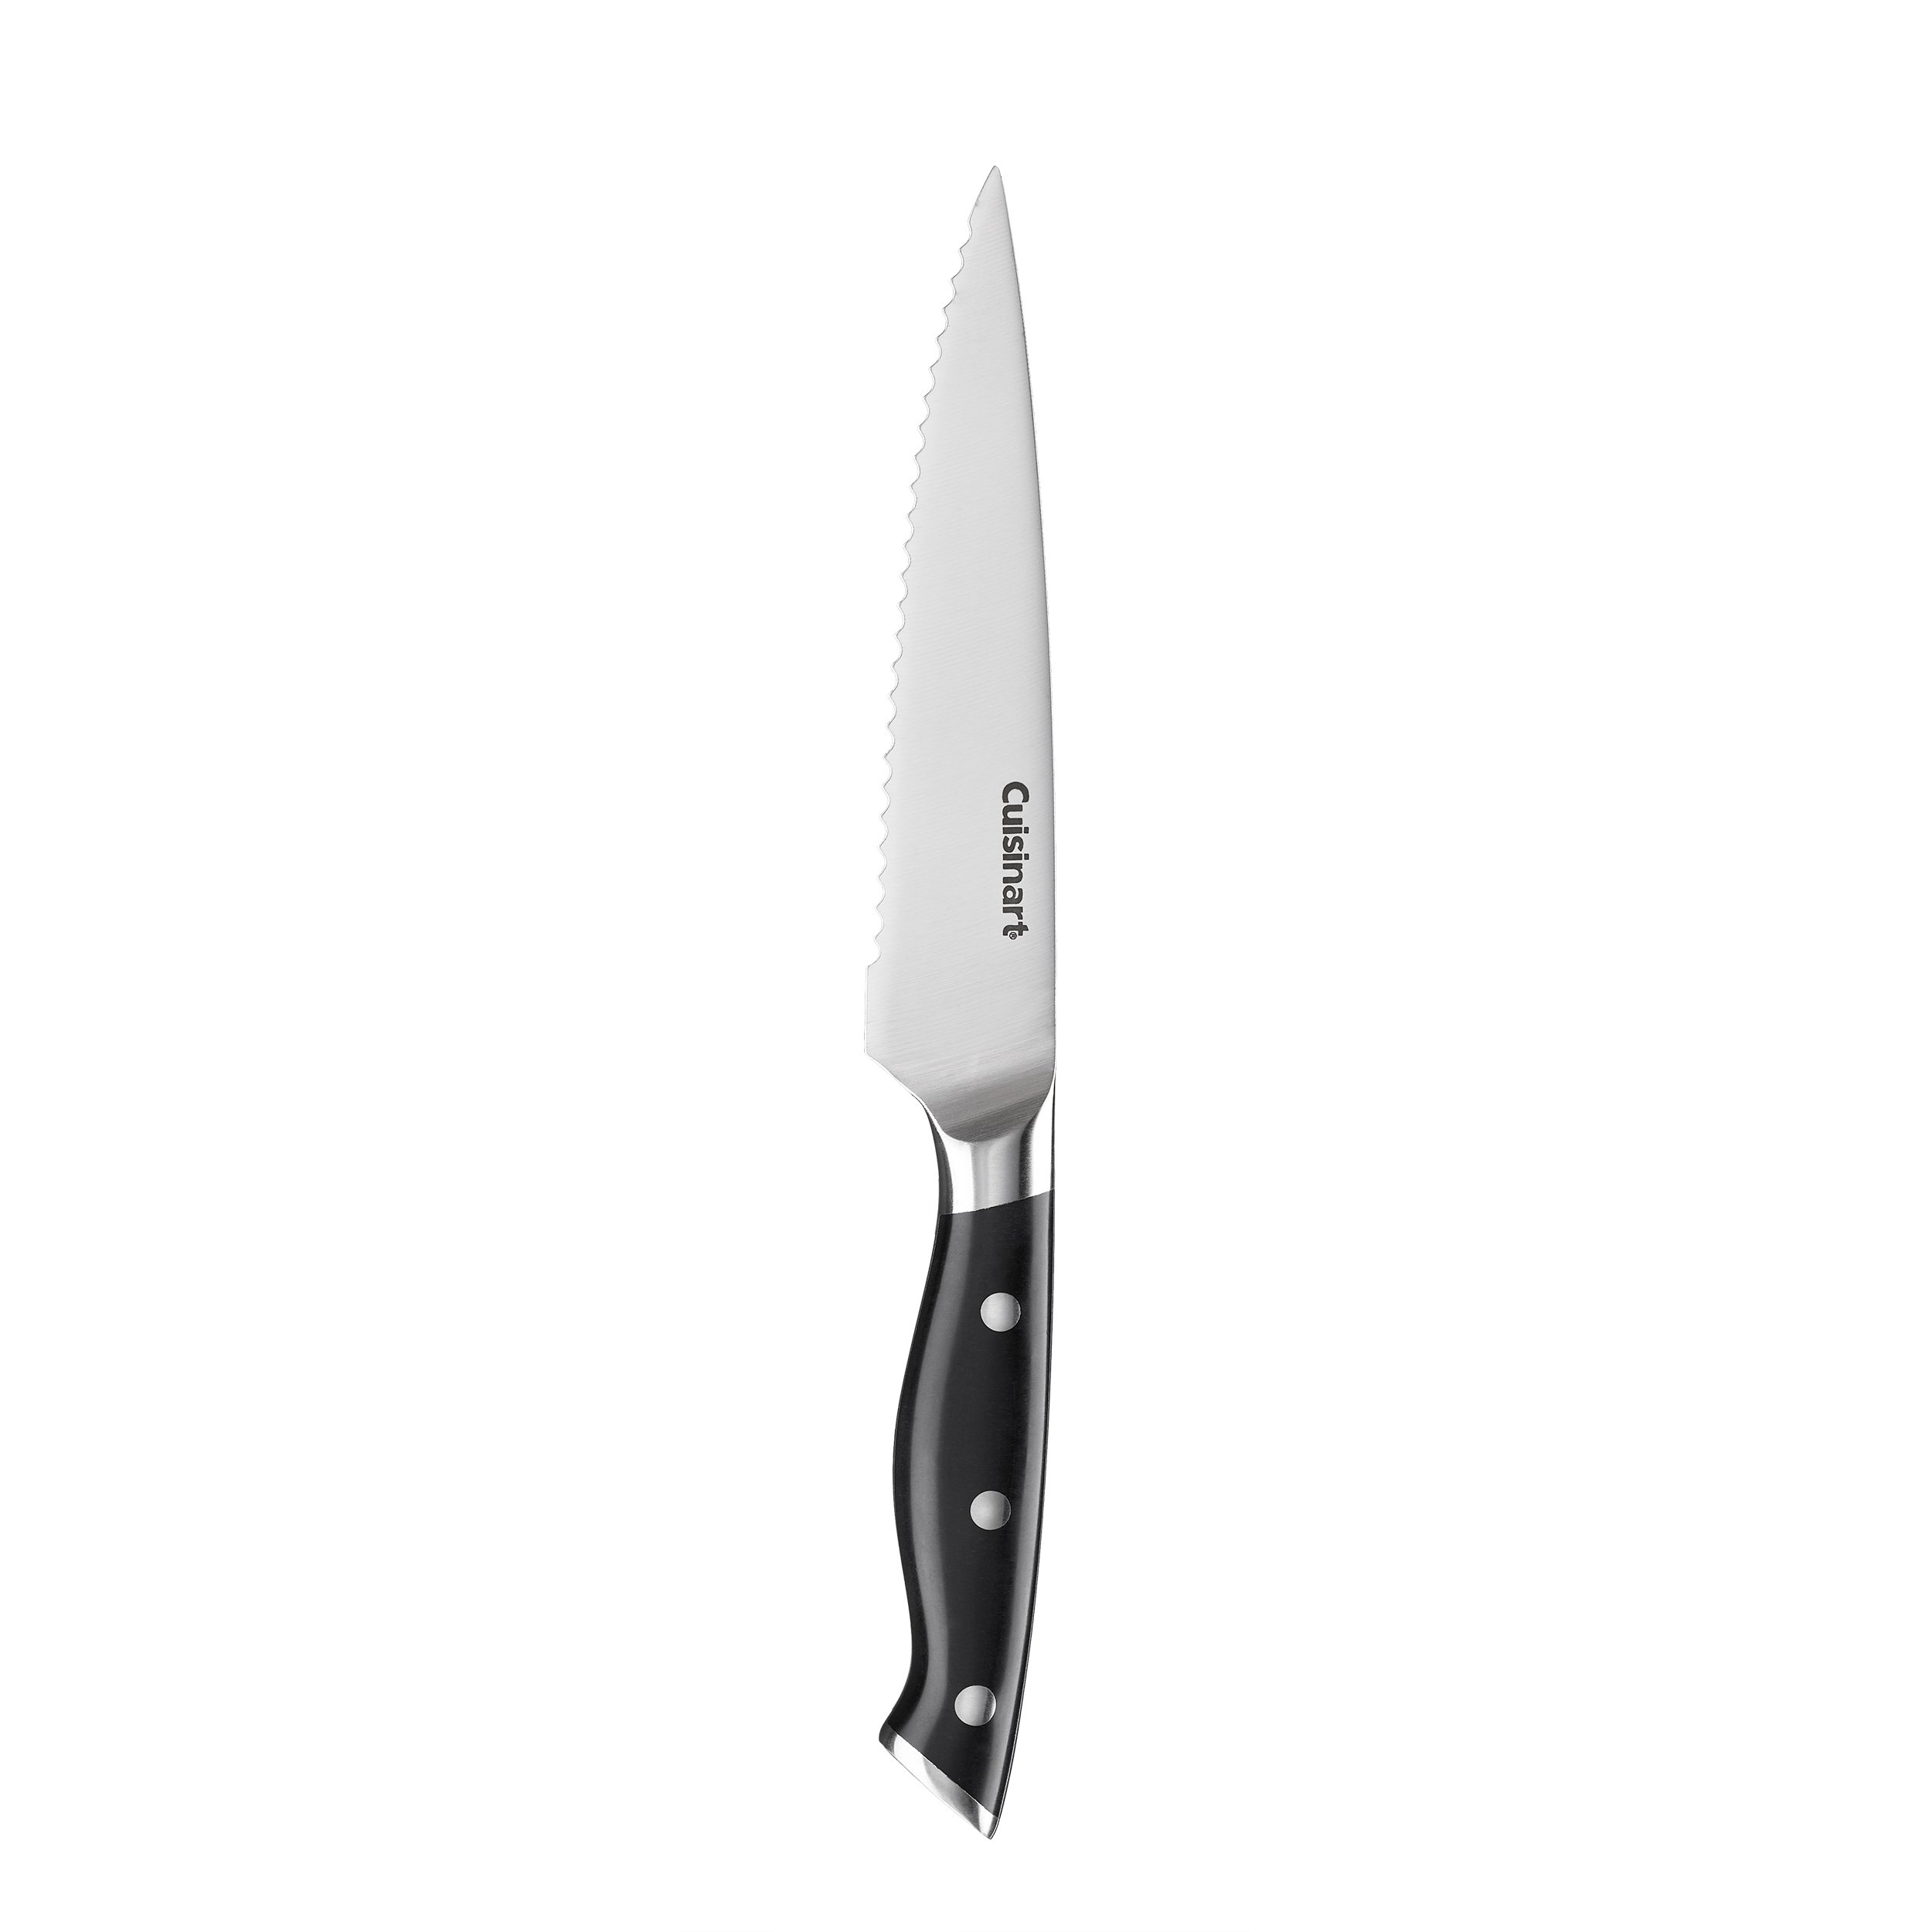 Cuisinart Forged Triple Rivet, 15-Piece Knife Set w/ Block, Superior High-Carbon Stainless Steel Blades - White